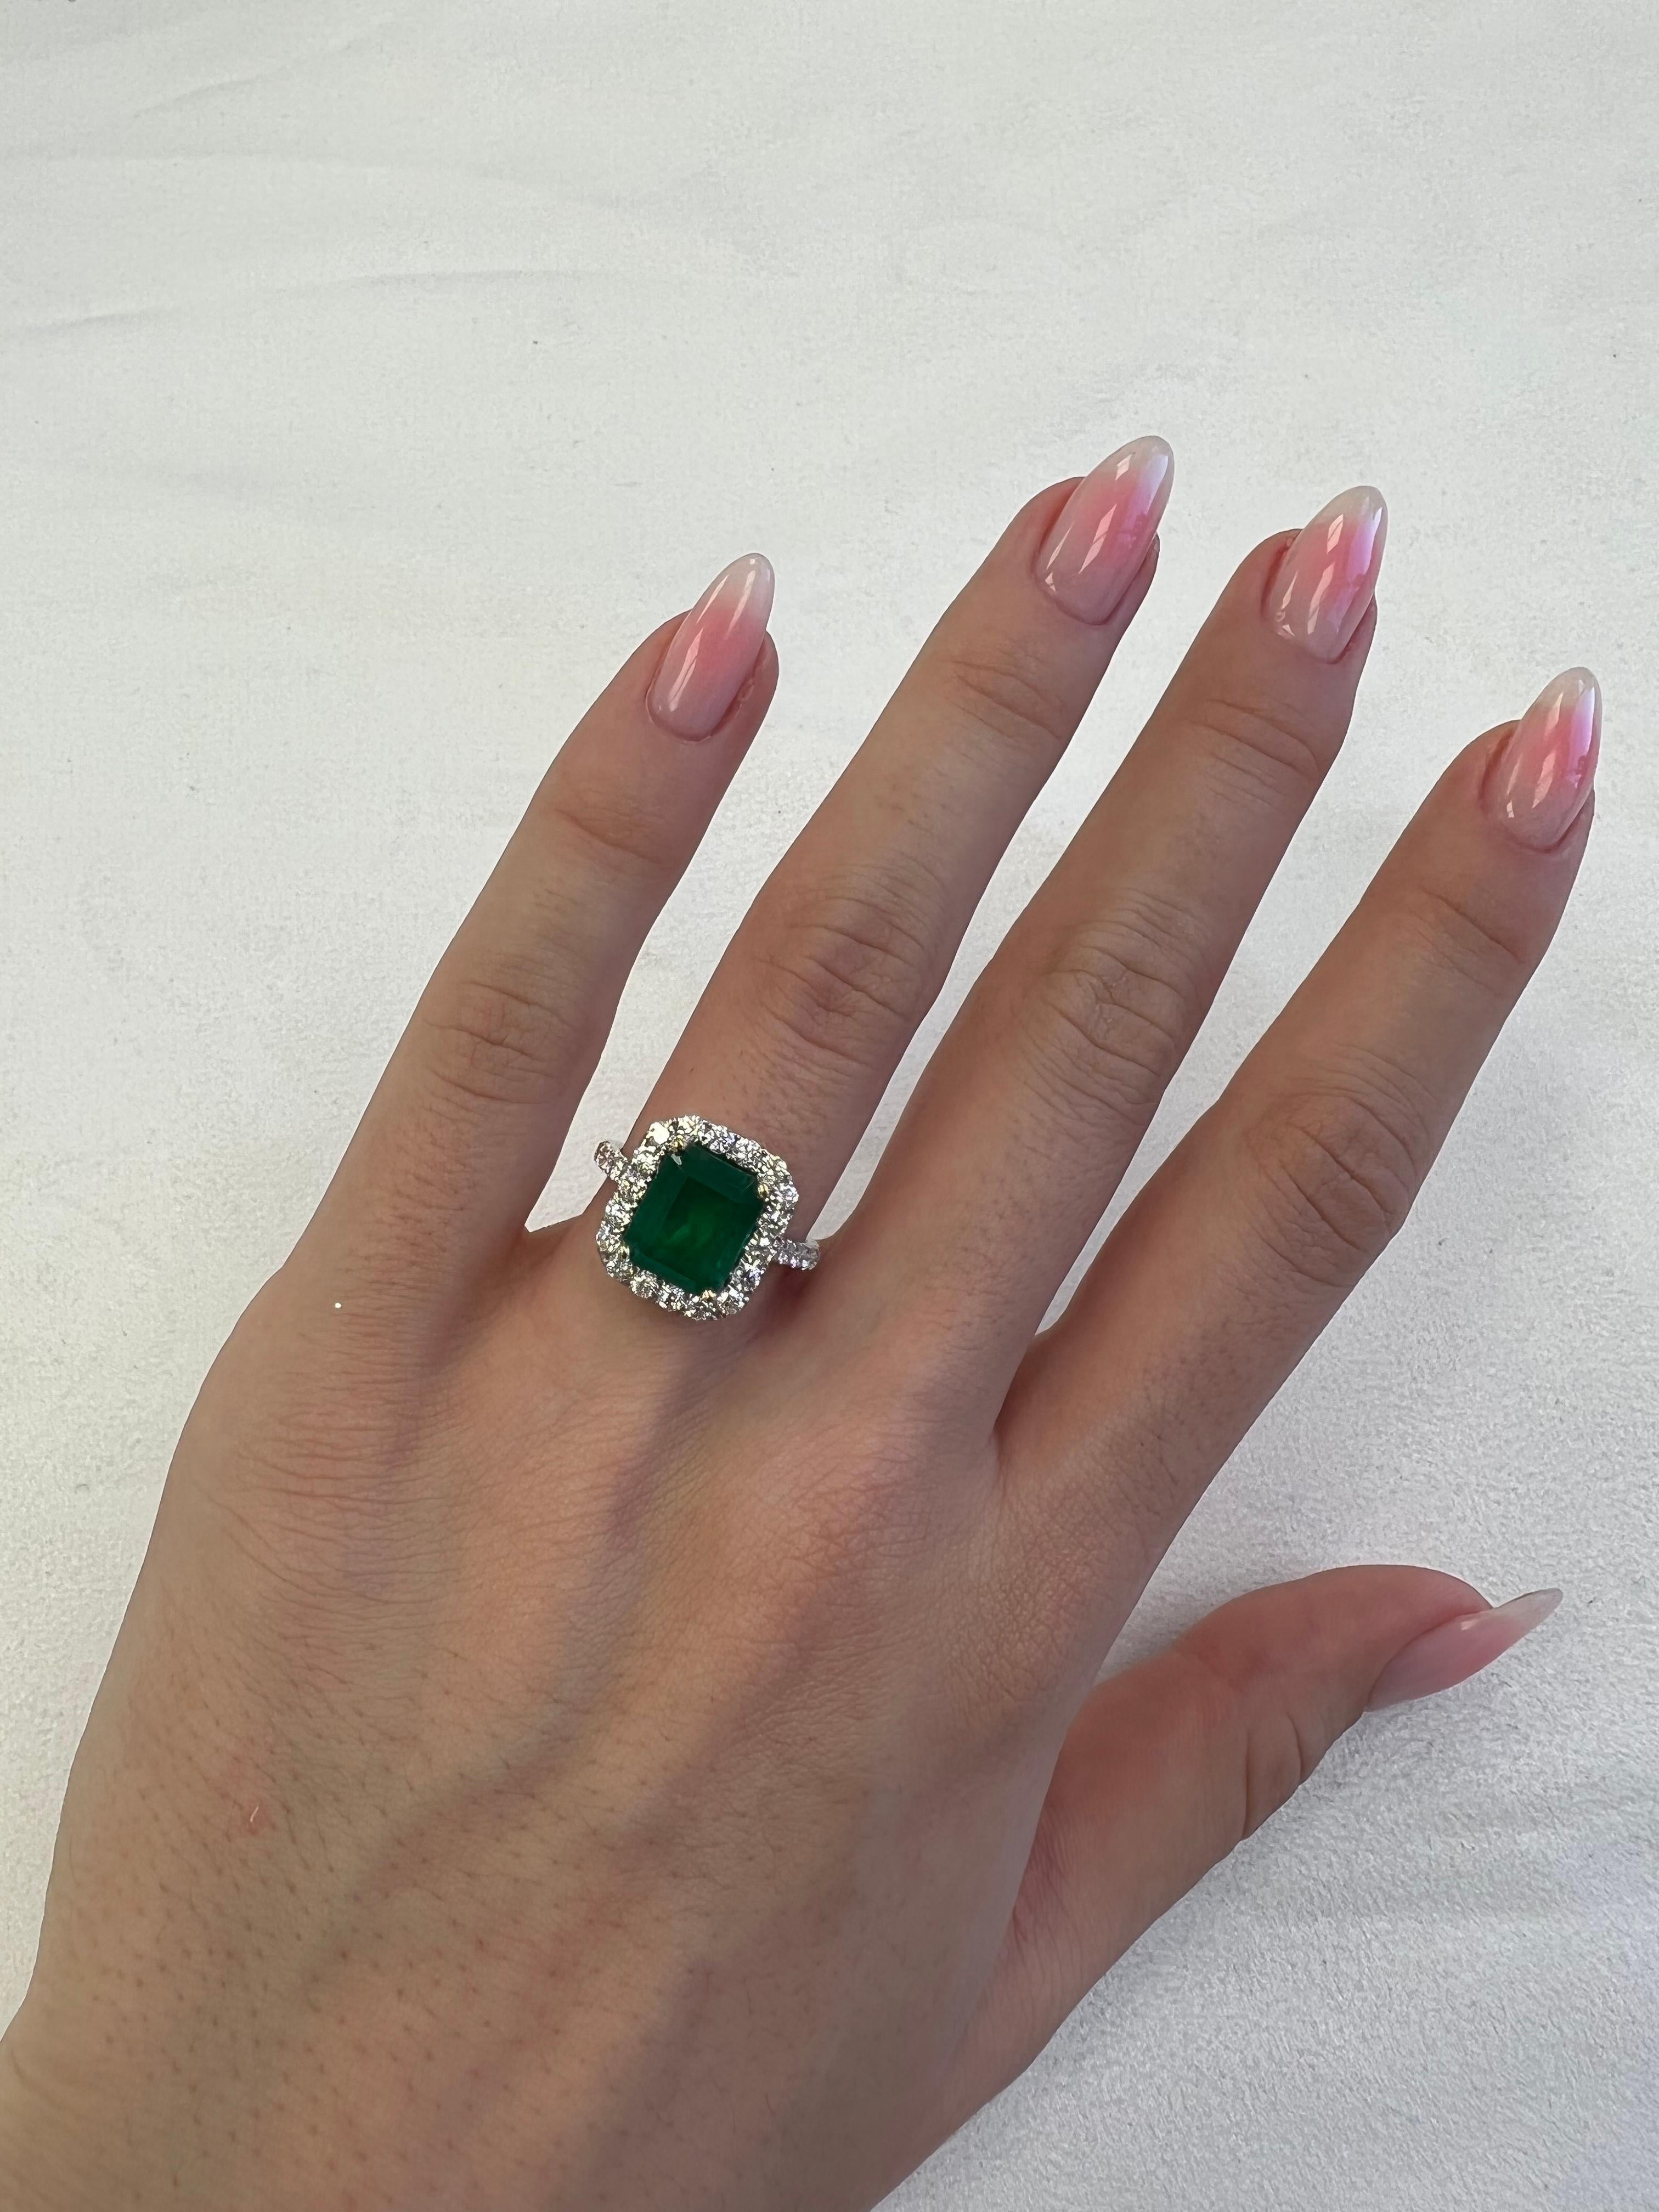 Classic emerald and diamond halo ring, GIA certified. 
4.68 carats total gemstone weight.
3.60 carat emerald cut emerald, F2, GIA certified. Complimented by 30 round brilliant diamonds, 1.08 carats, F/G color and VS clarity. 18k white and yellow